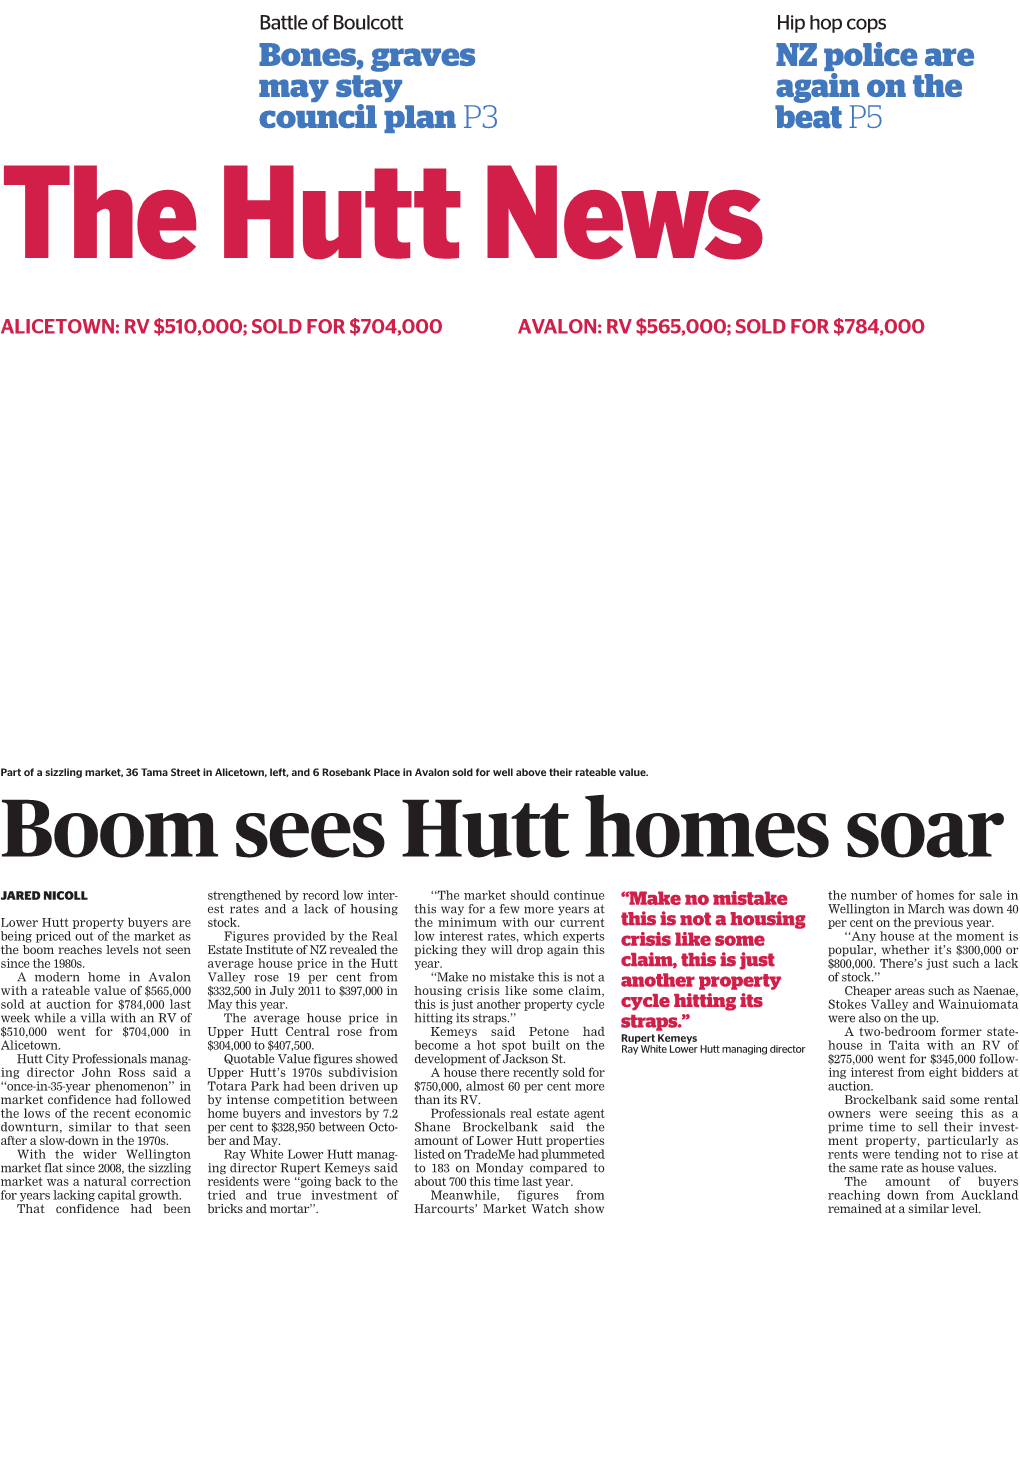 Lower Hutt Property Buyers Are Stock